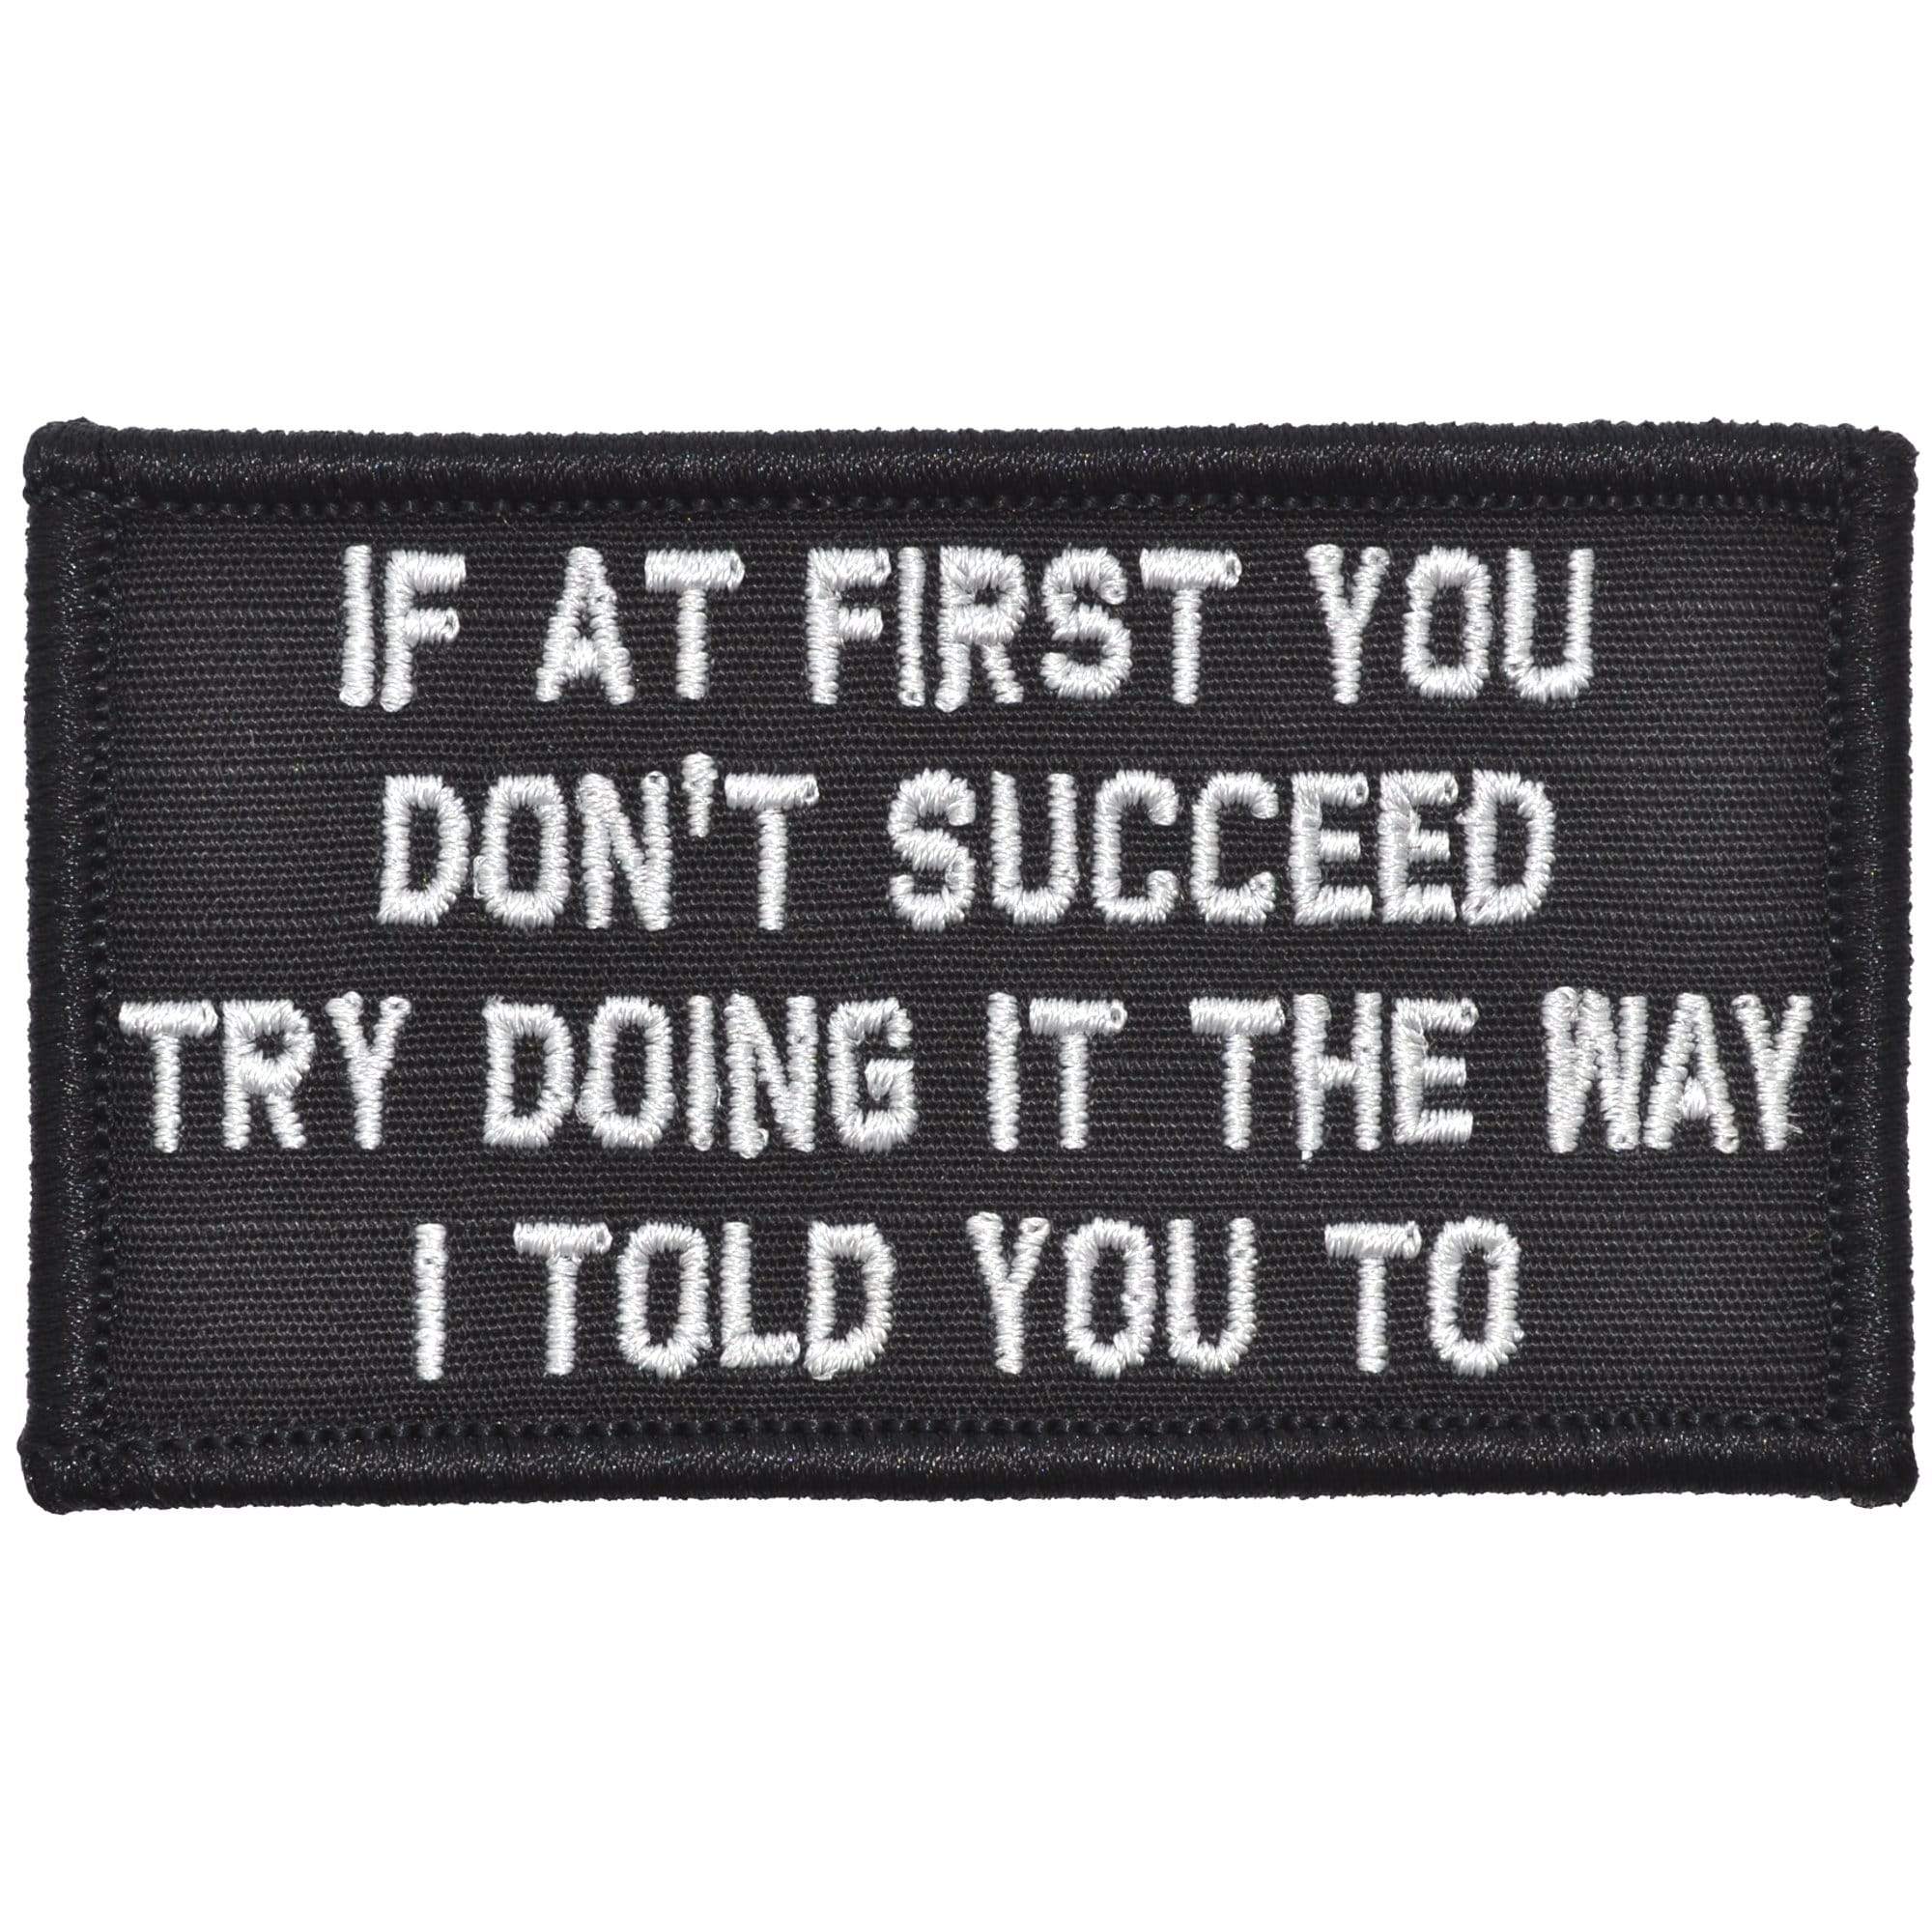 Tactical Gear Junkie Patches Black If At First You Don't Succeed, Try Doing It The Way I Told You To - 2x3.5 Patch